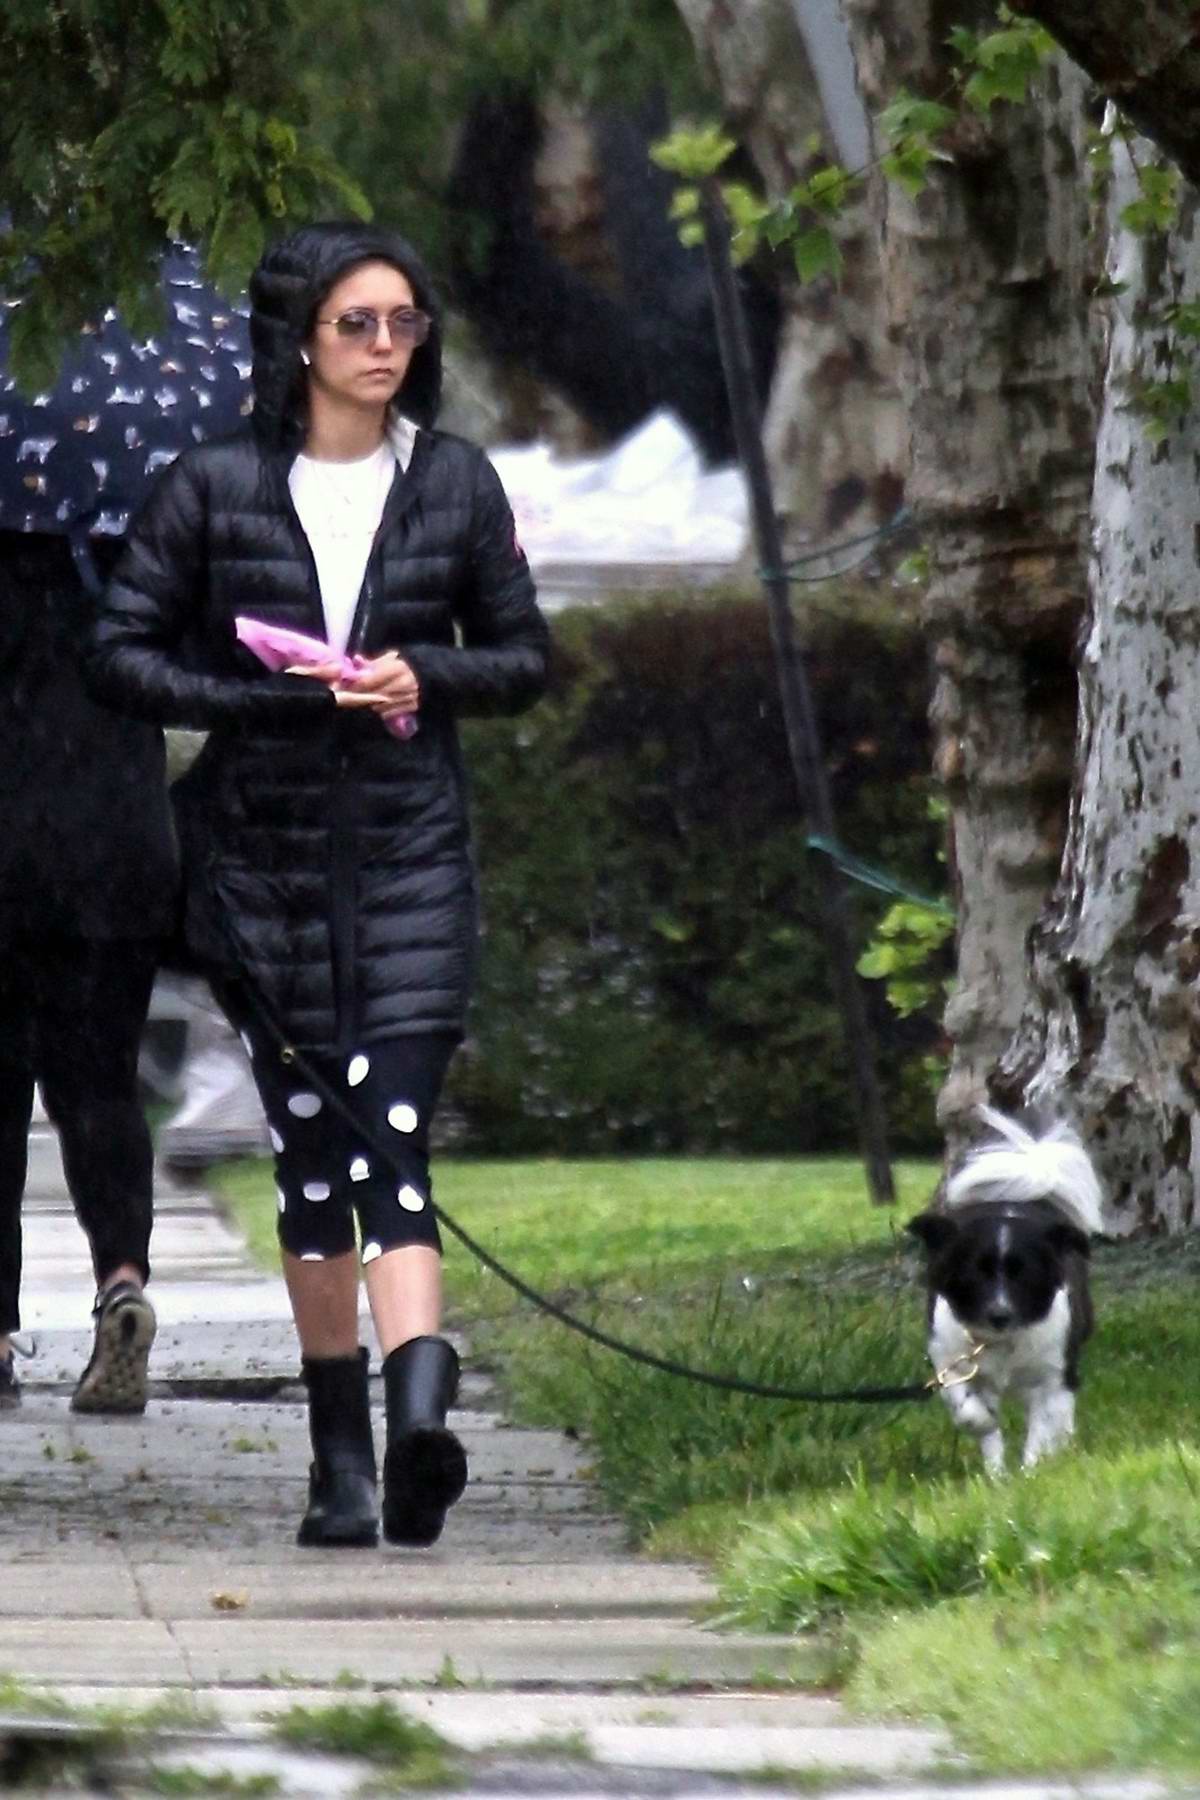 Noomi Rapace sports Gucci hoodie and Burberry check leggings while